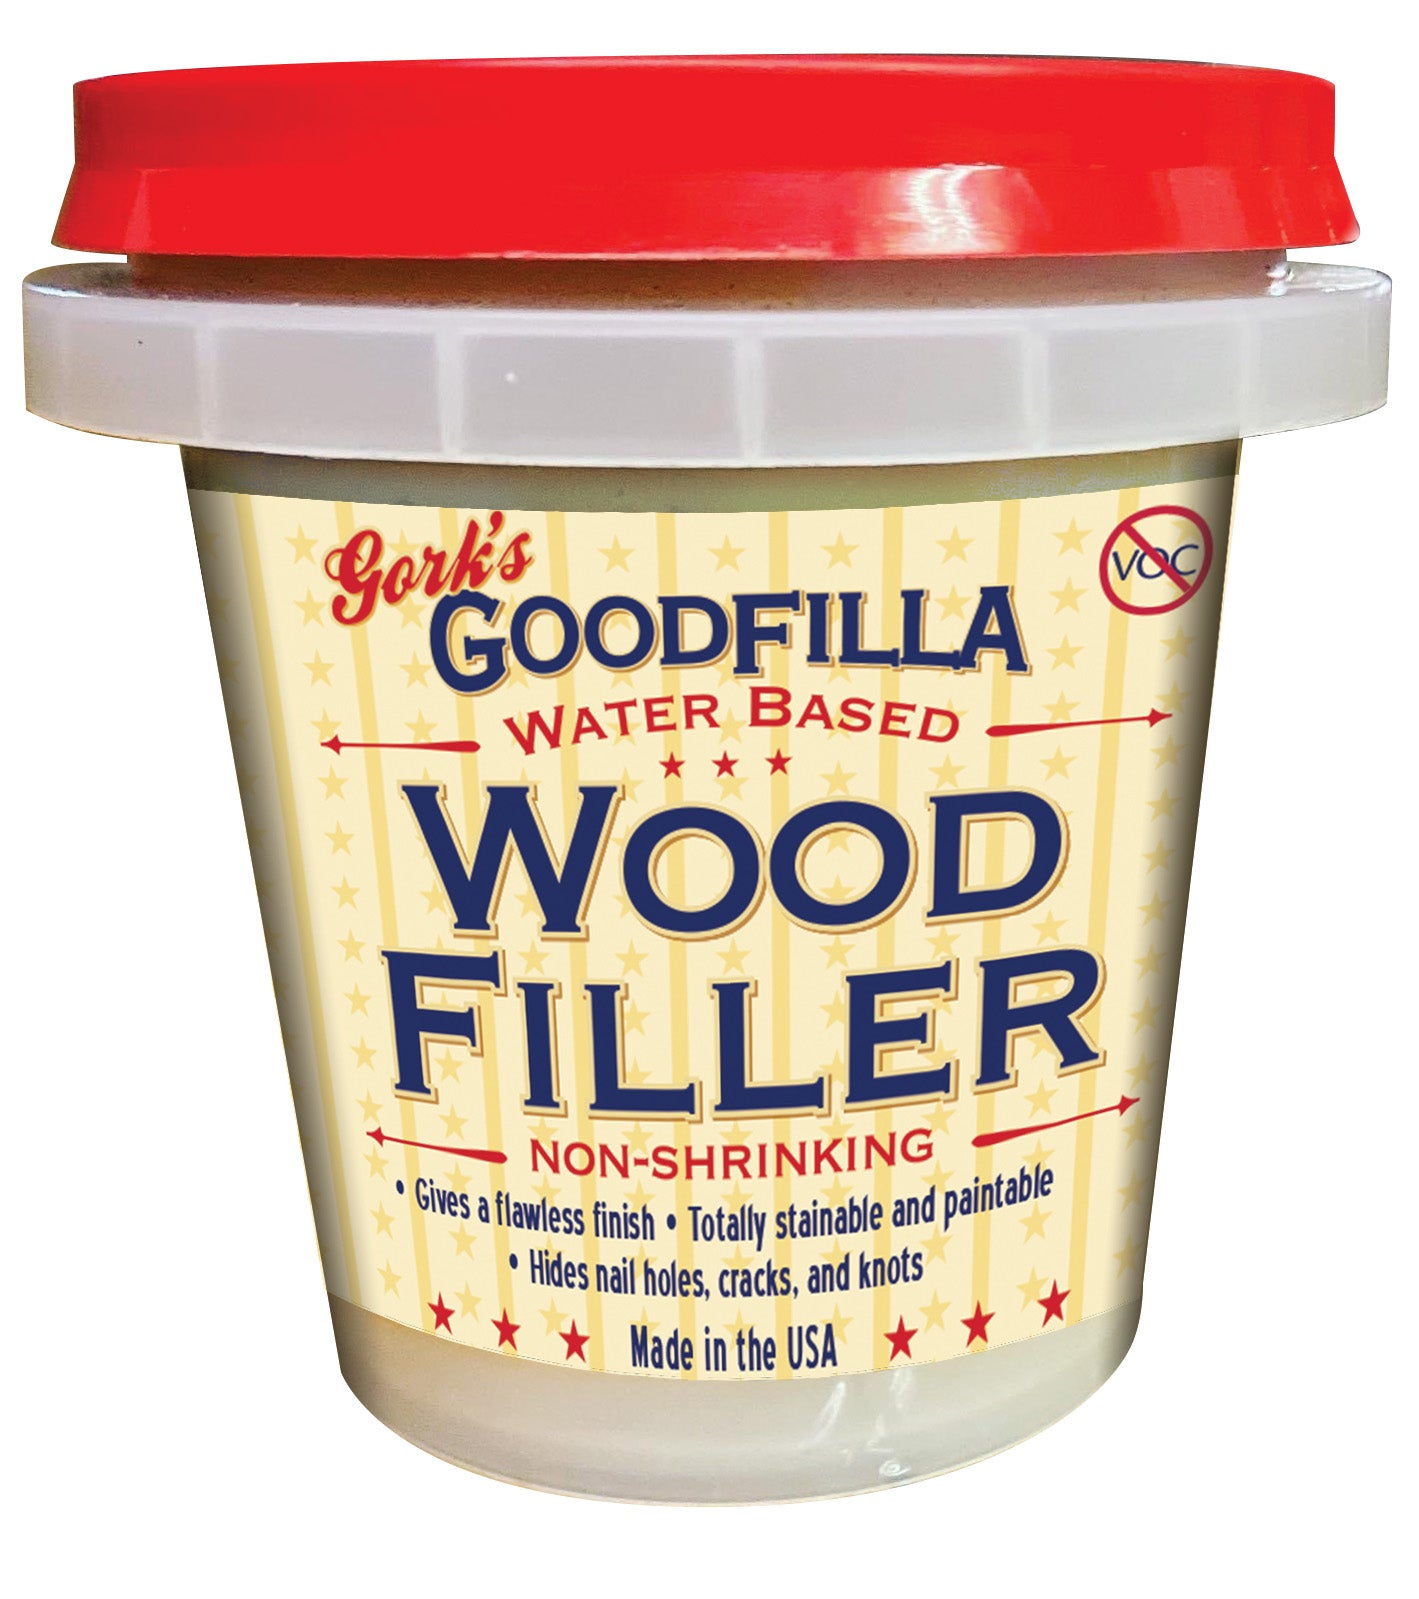 Is Wood Filler Stainable? Achieve Flawless Finish!